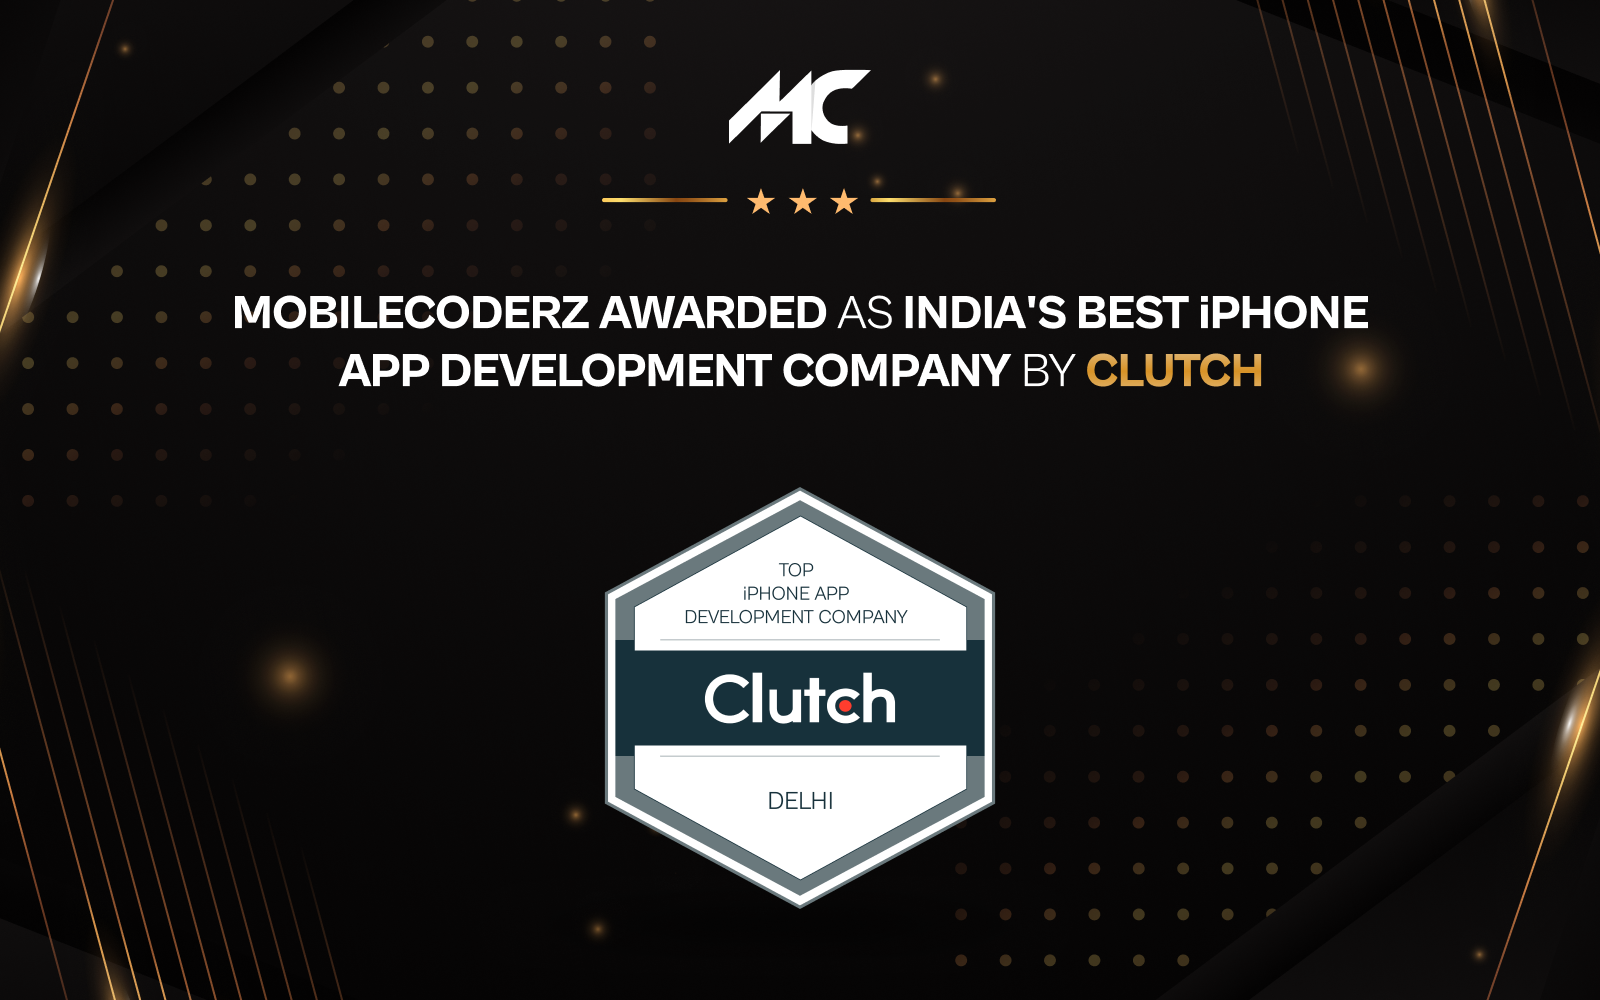 Mobilecoderz Awarded as India’s Best iPhone App Development Company by Clutch